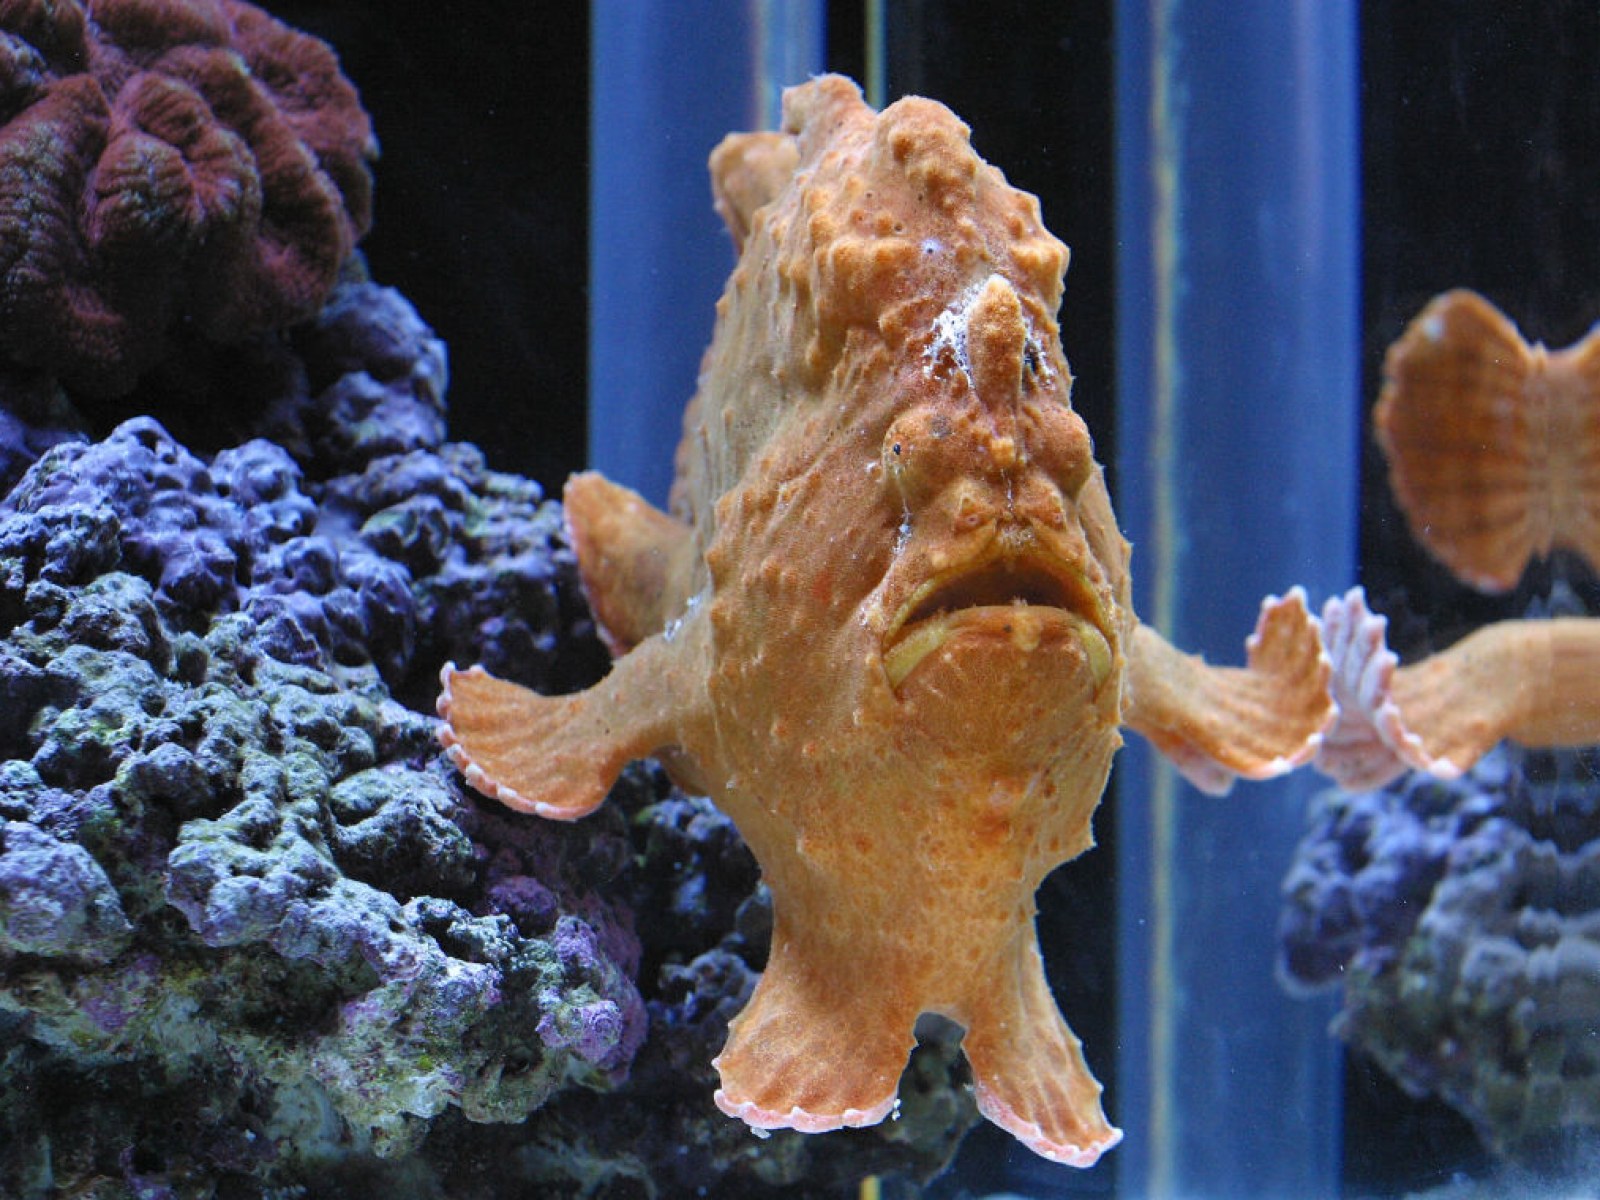 Weird Fish List With Pictures & Facts: The World's Weirdest Fish